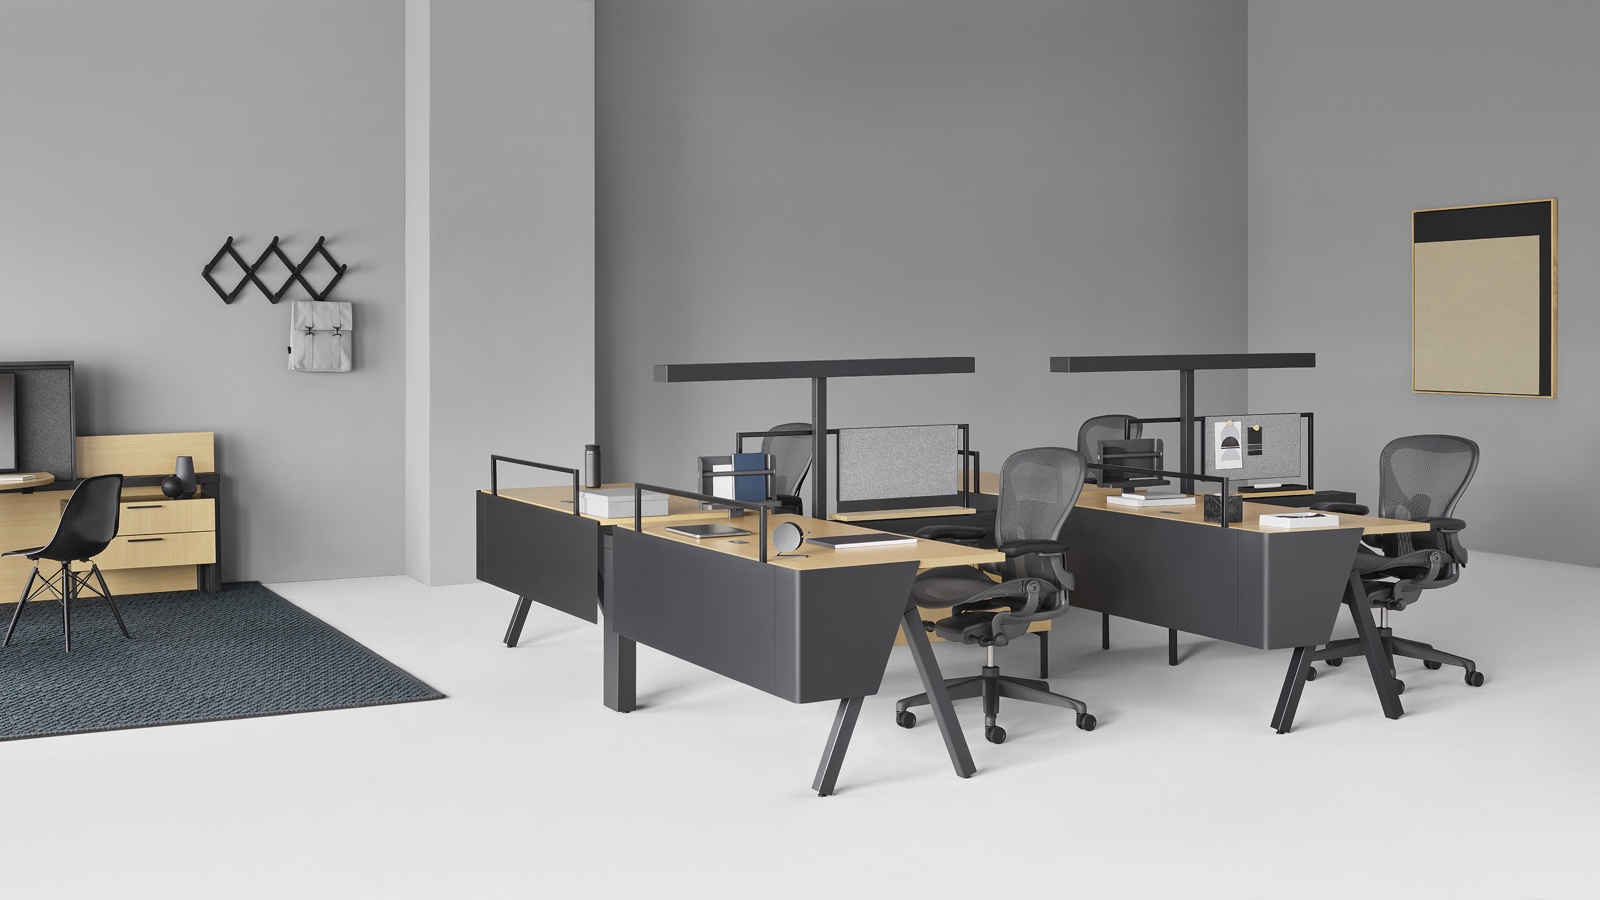 A Canvas Vista workstation with black Aeron office chairs in the foreground and a Canvas Vista collaborative space with display unit in the background. Select to go to the Small Workstations page within the Canvas Lookbook.